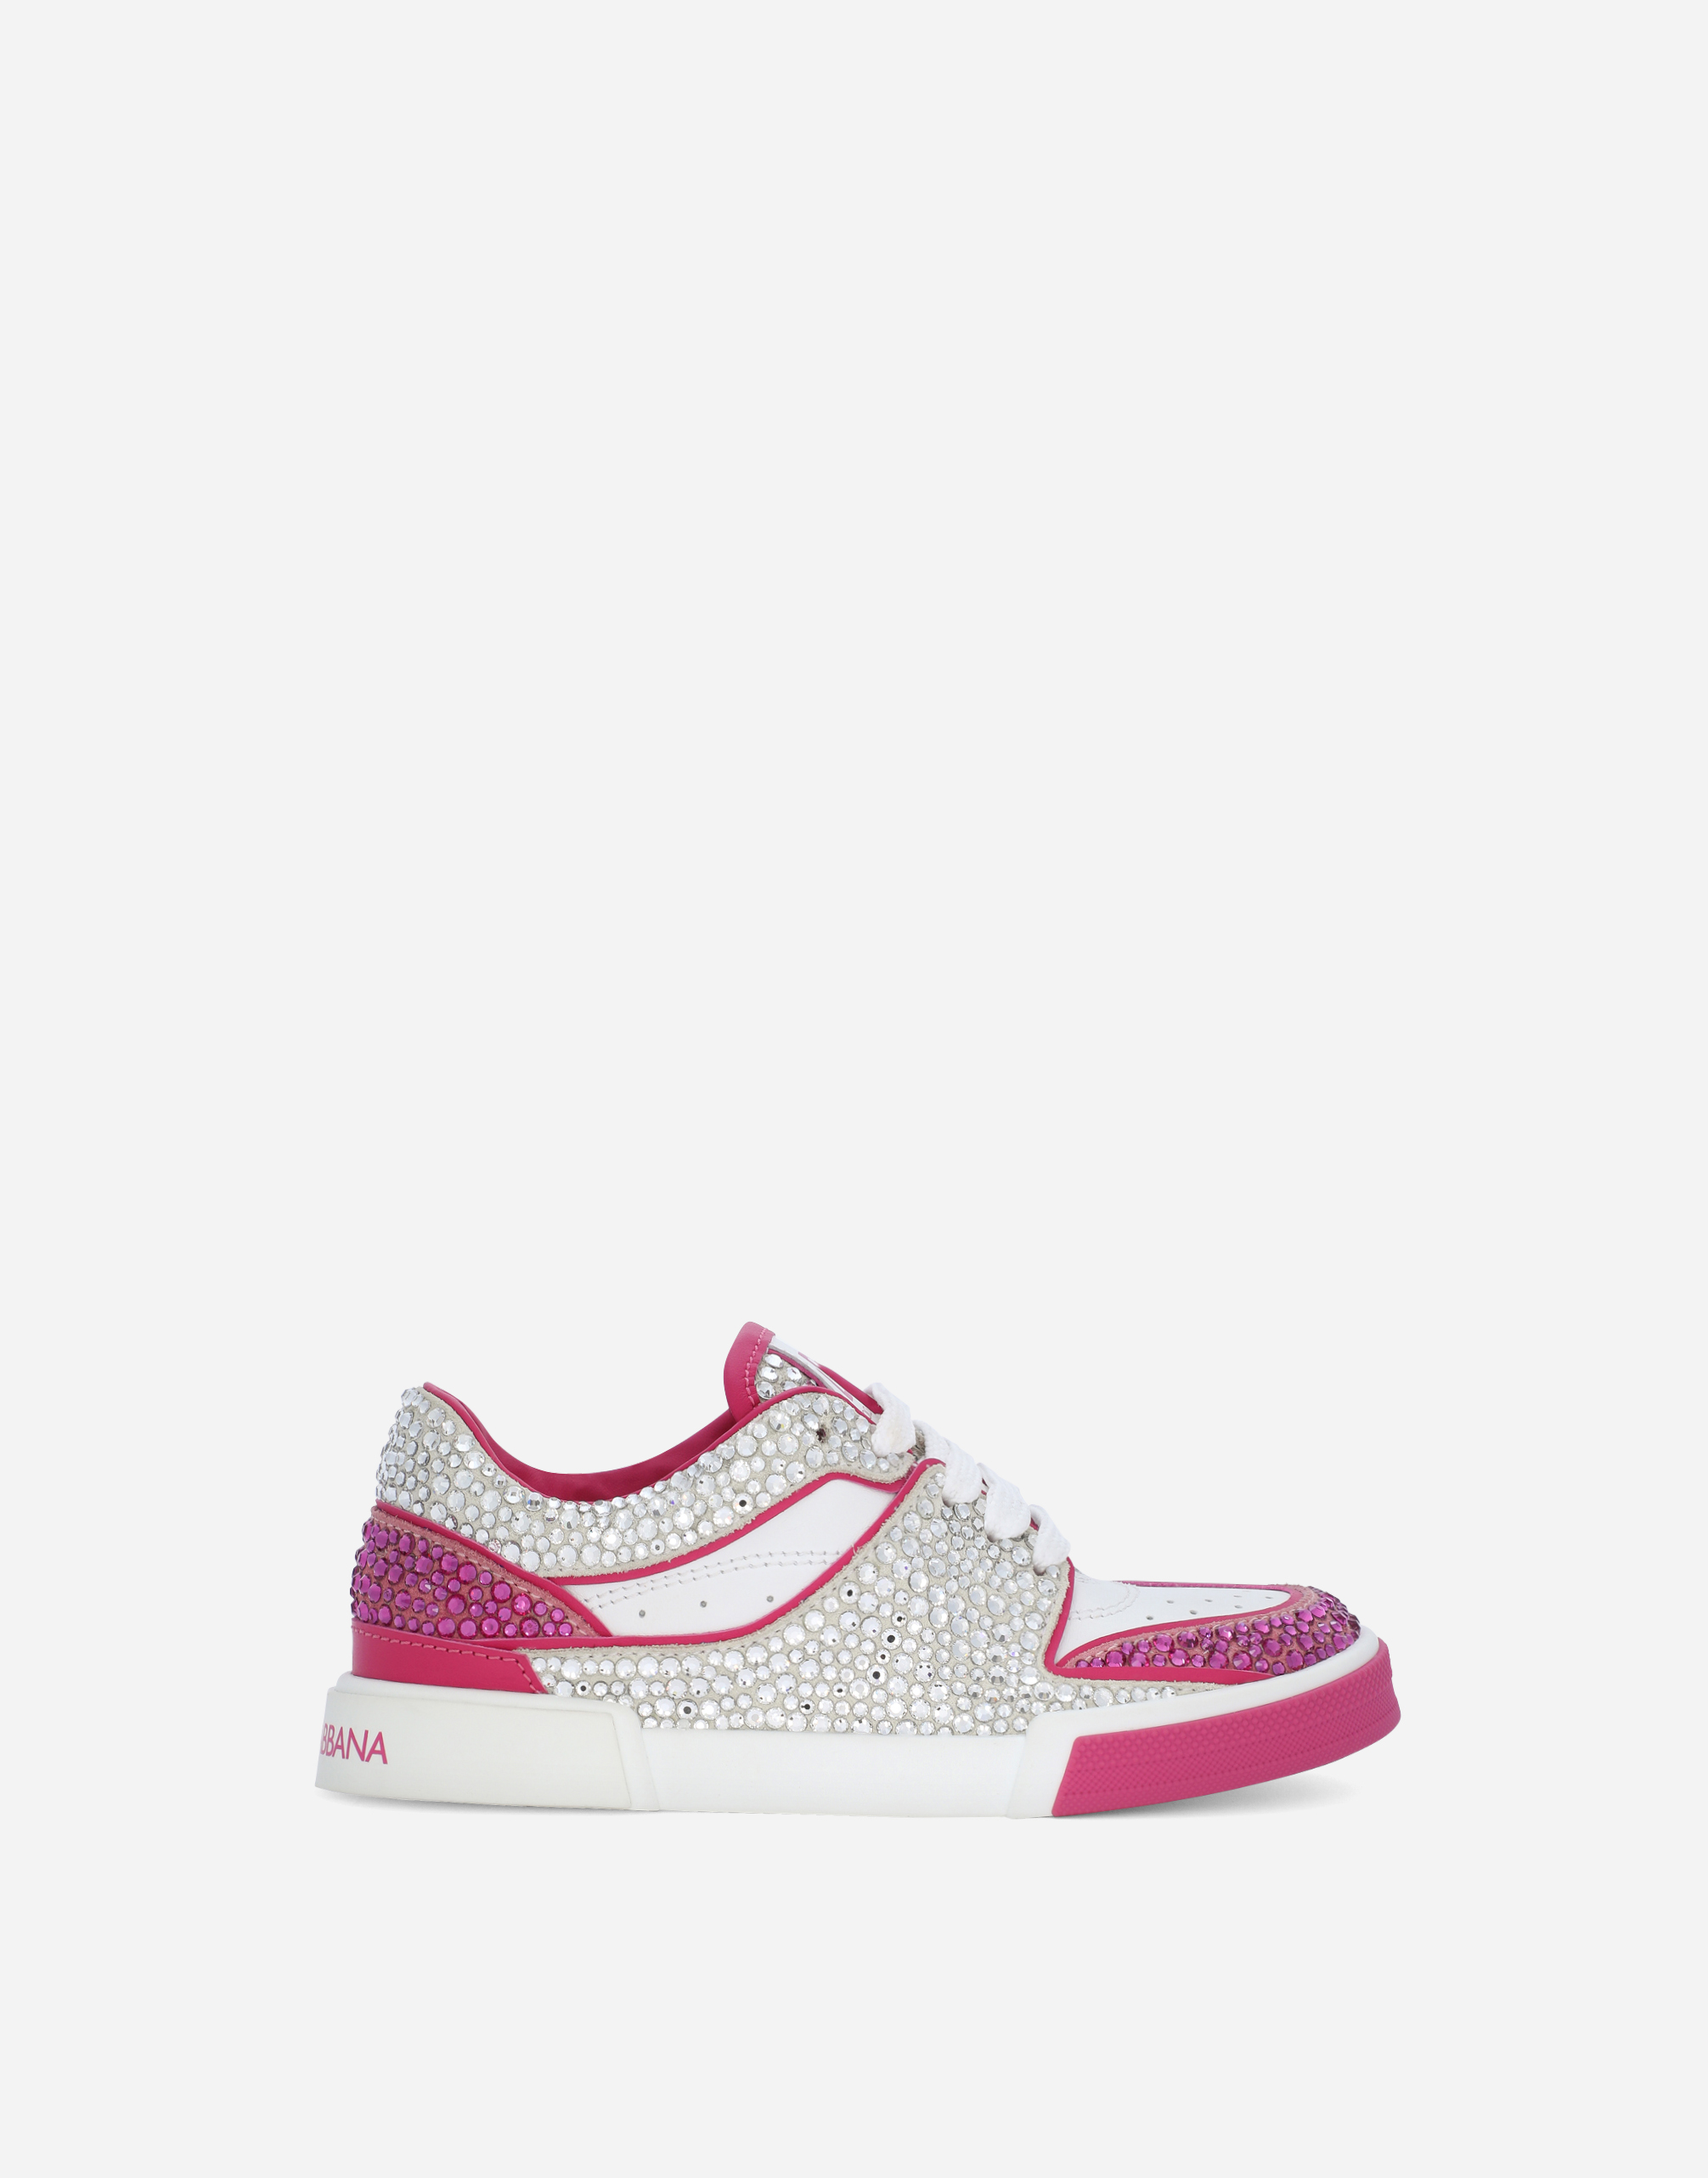 New Roma sneakers with fusible rhinestones in Multicolor